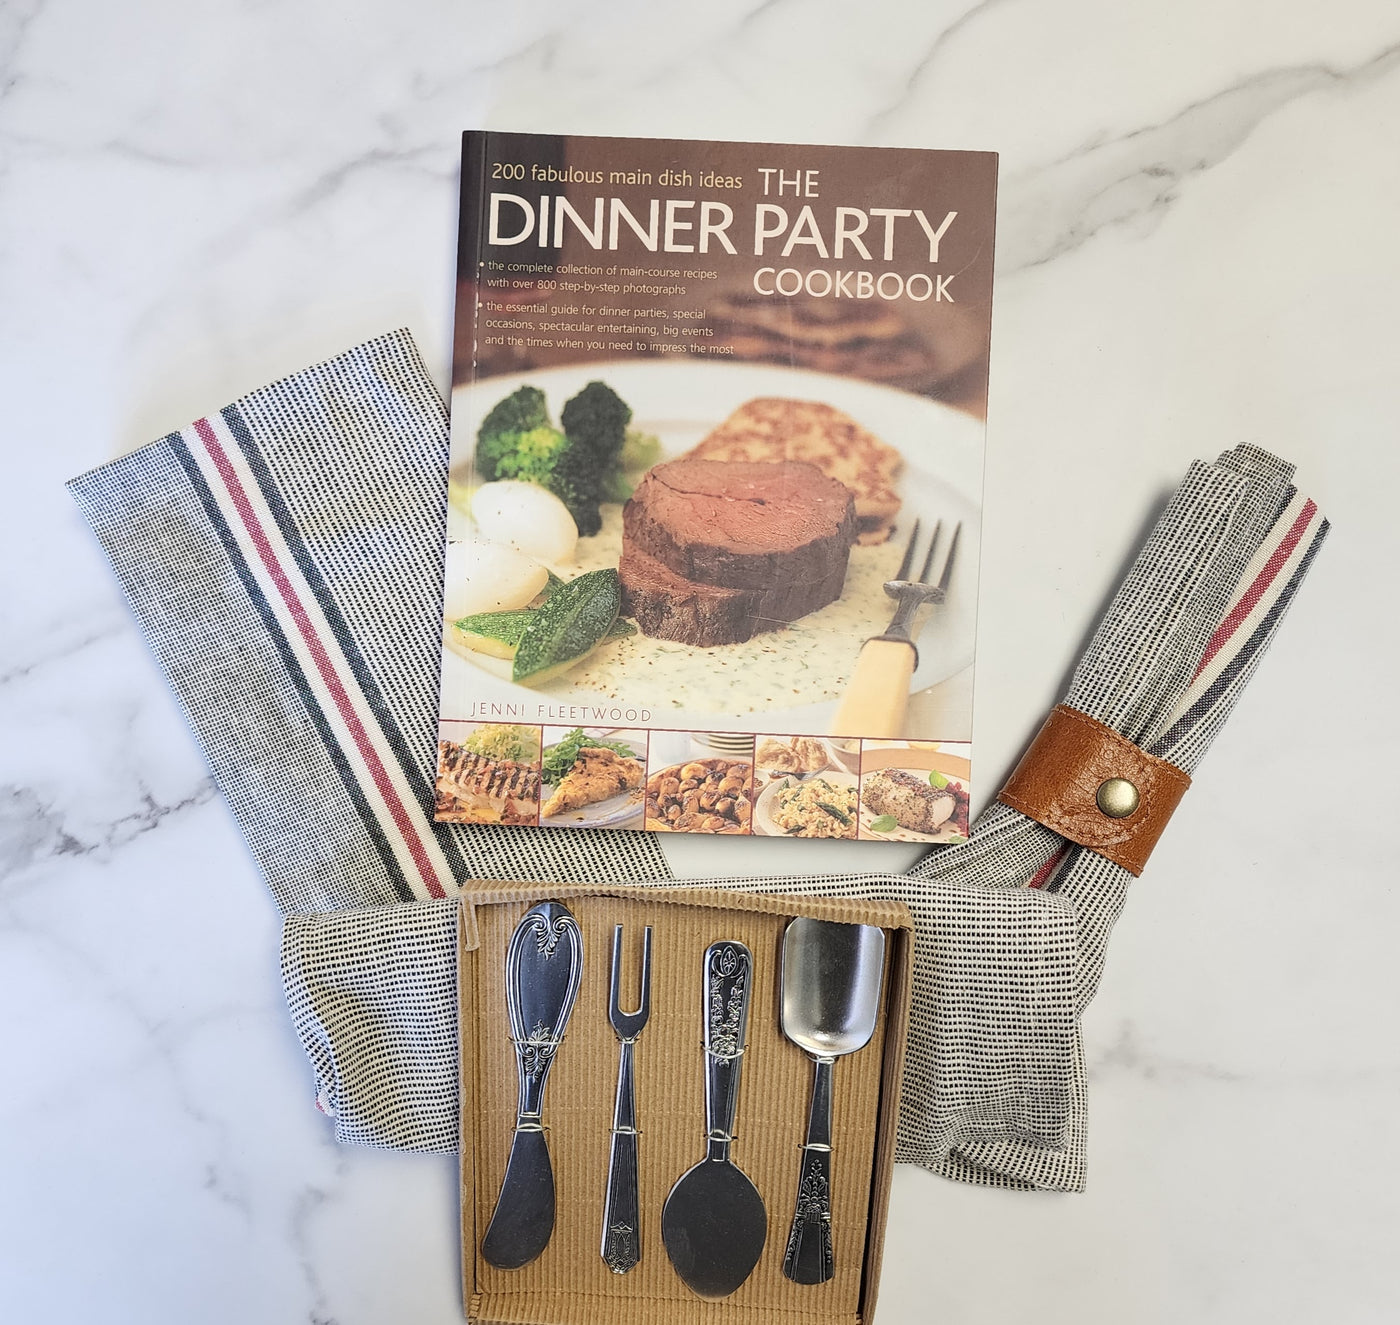 Dinner party cookbook, cotton chambray, leather napkin ring and cheese servers set